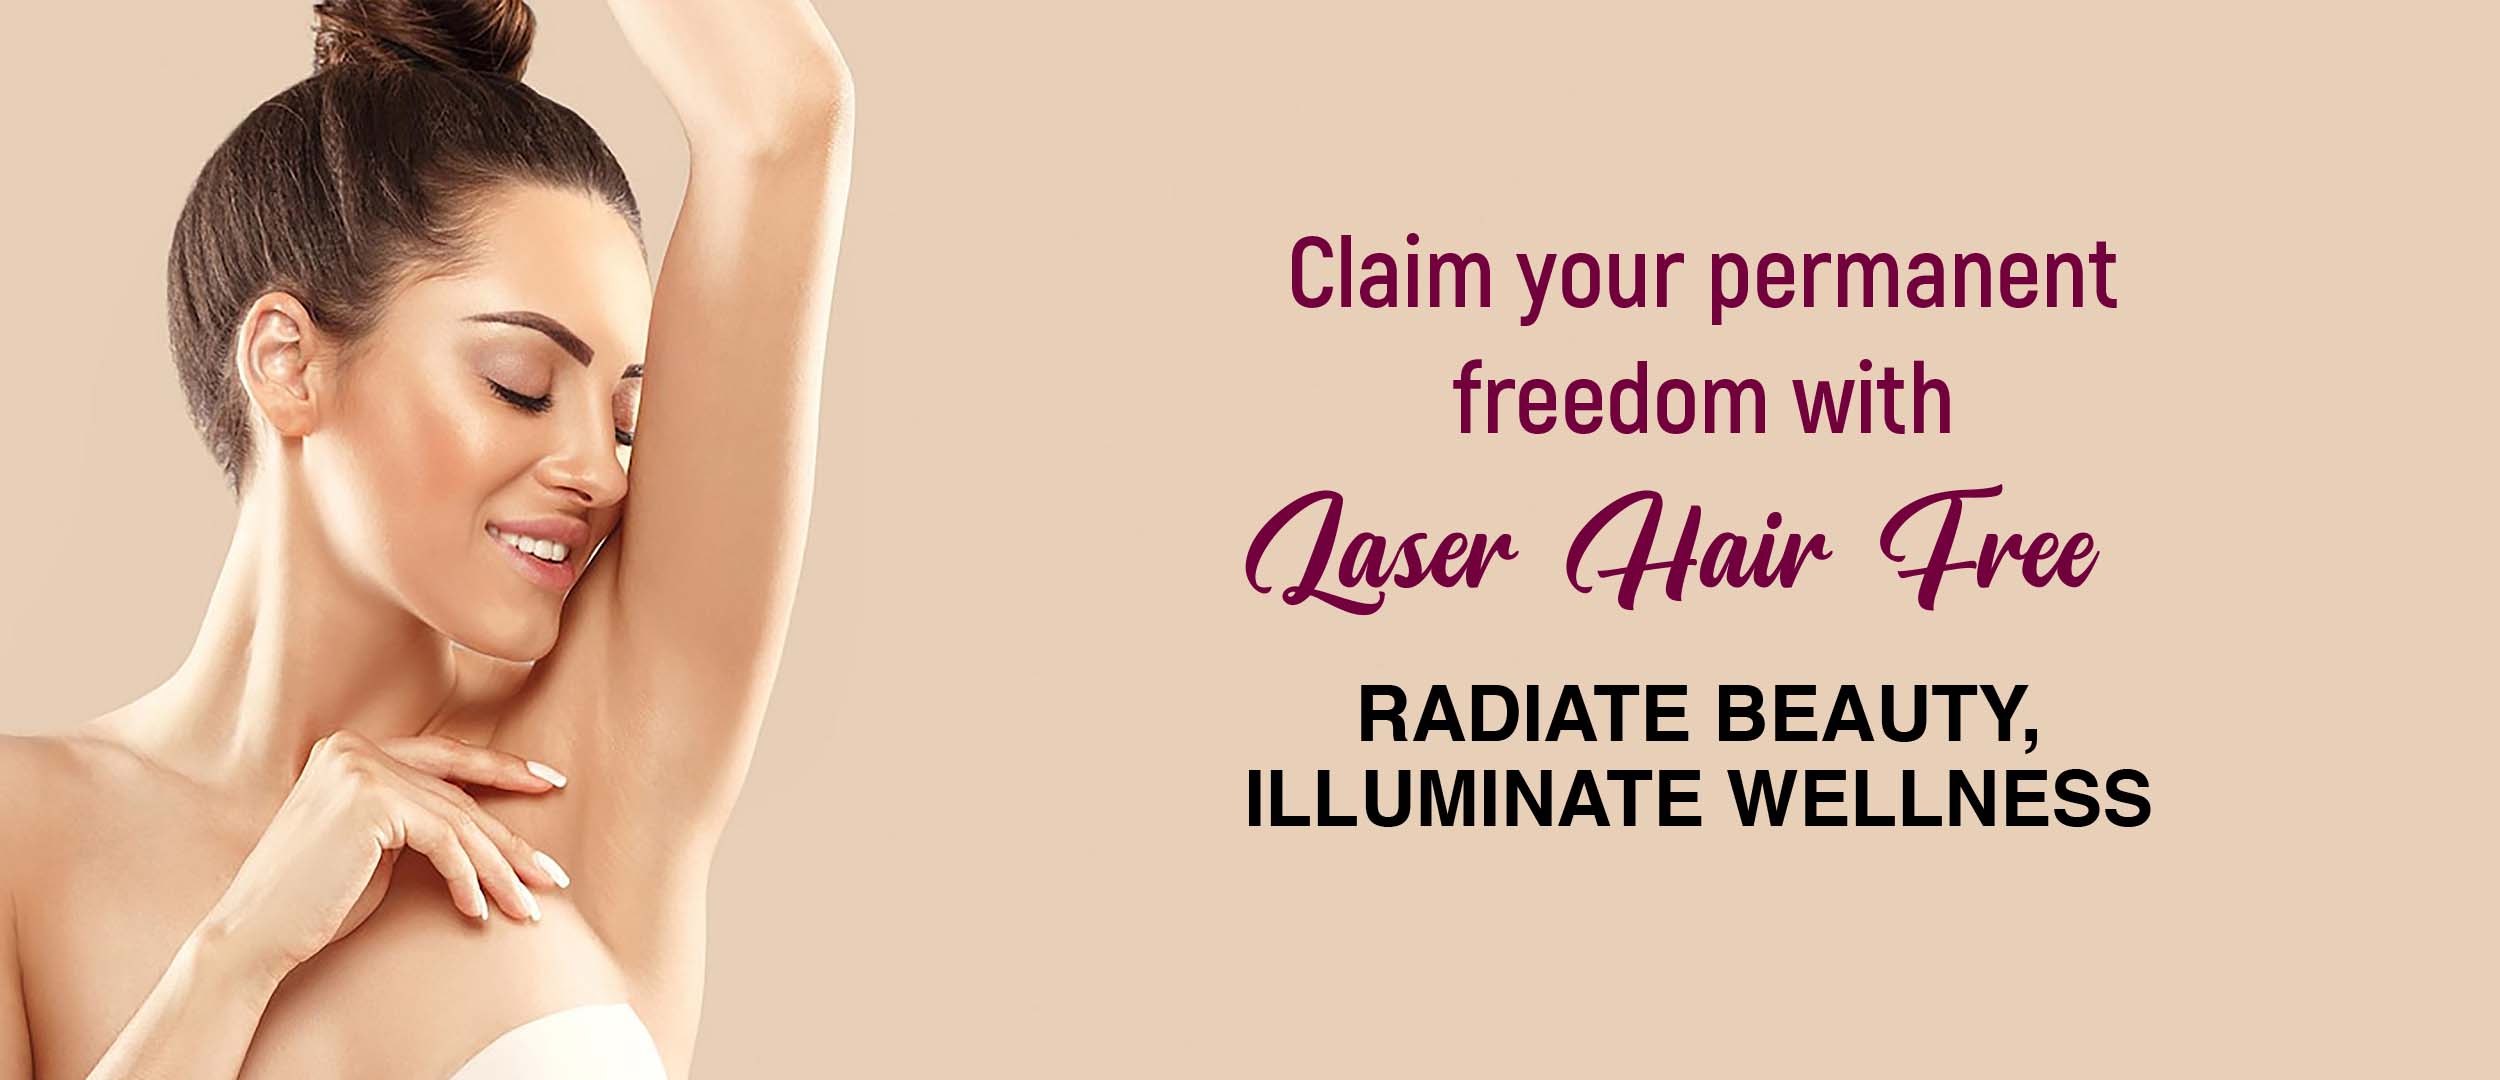 Laser Hair Reduction at meadows wellness